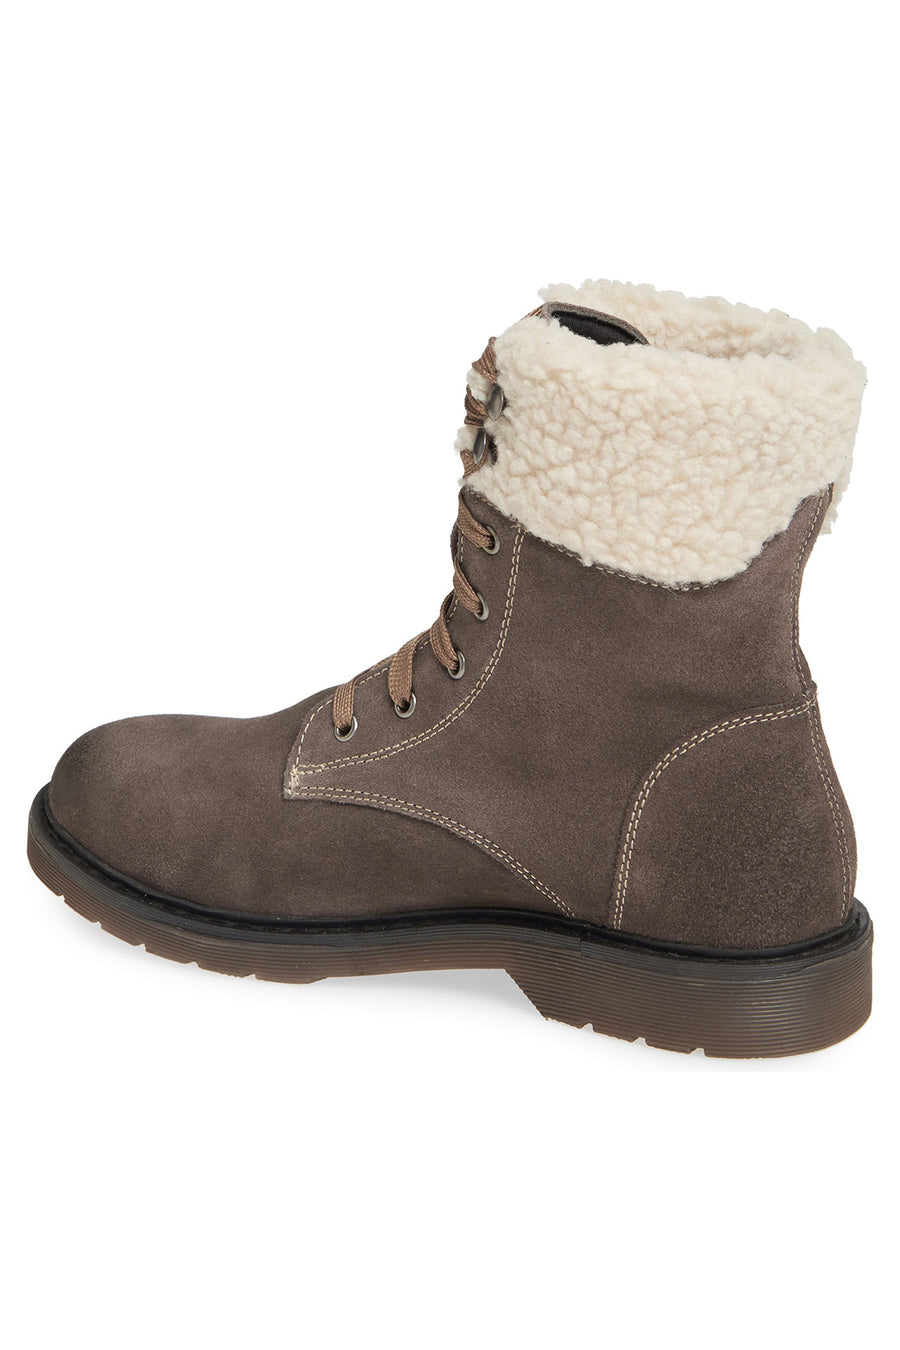 Dillon Grey Fleece Cuff Lace Up Boot Master